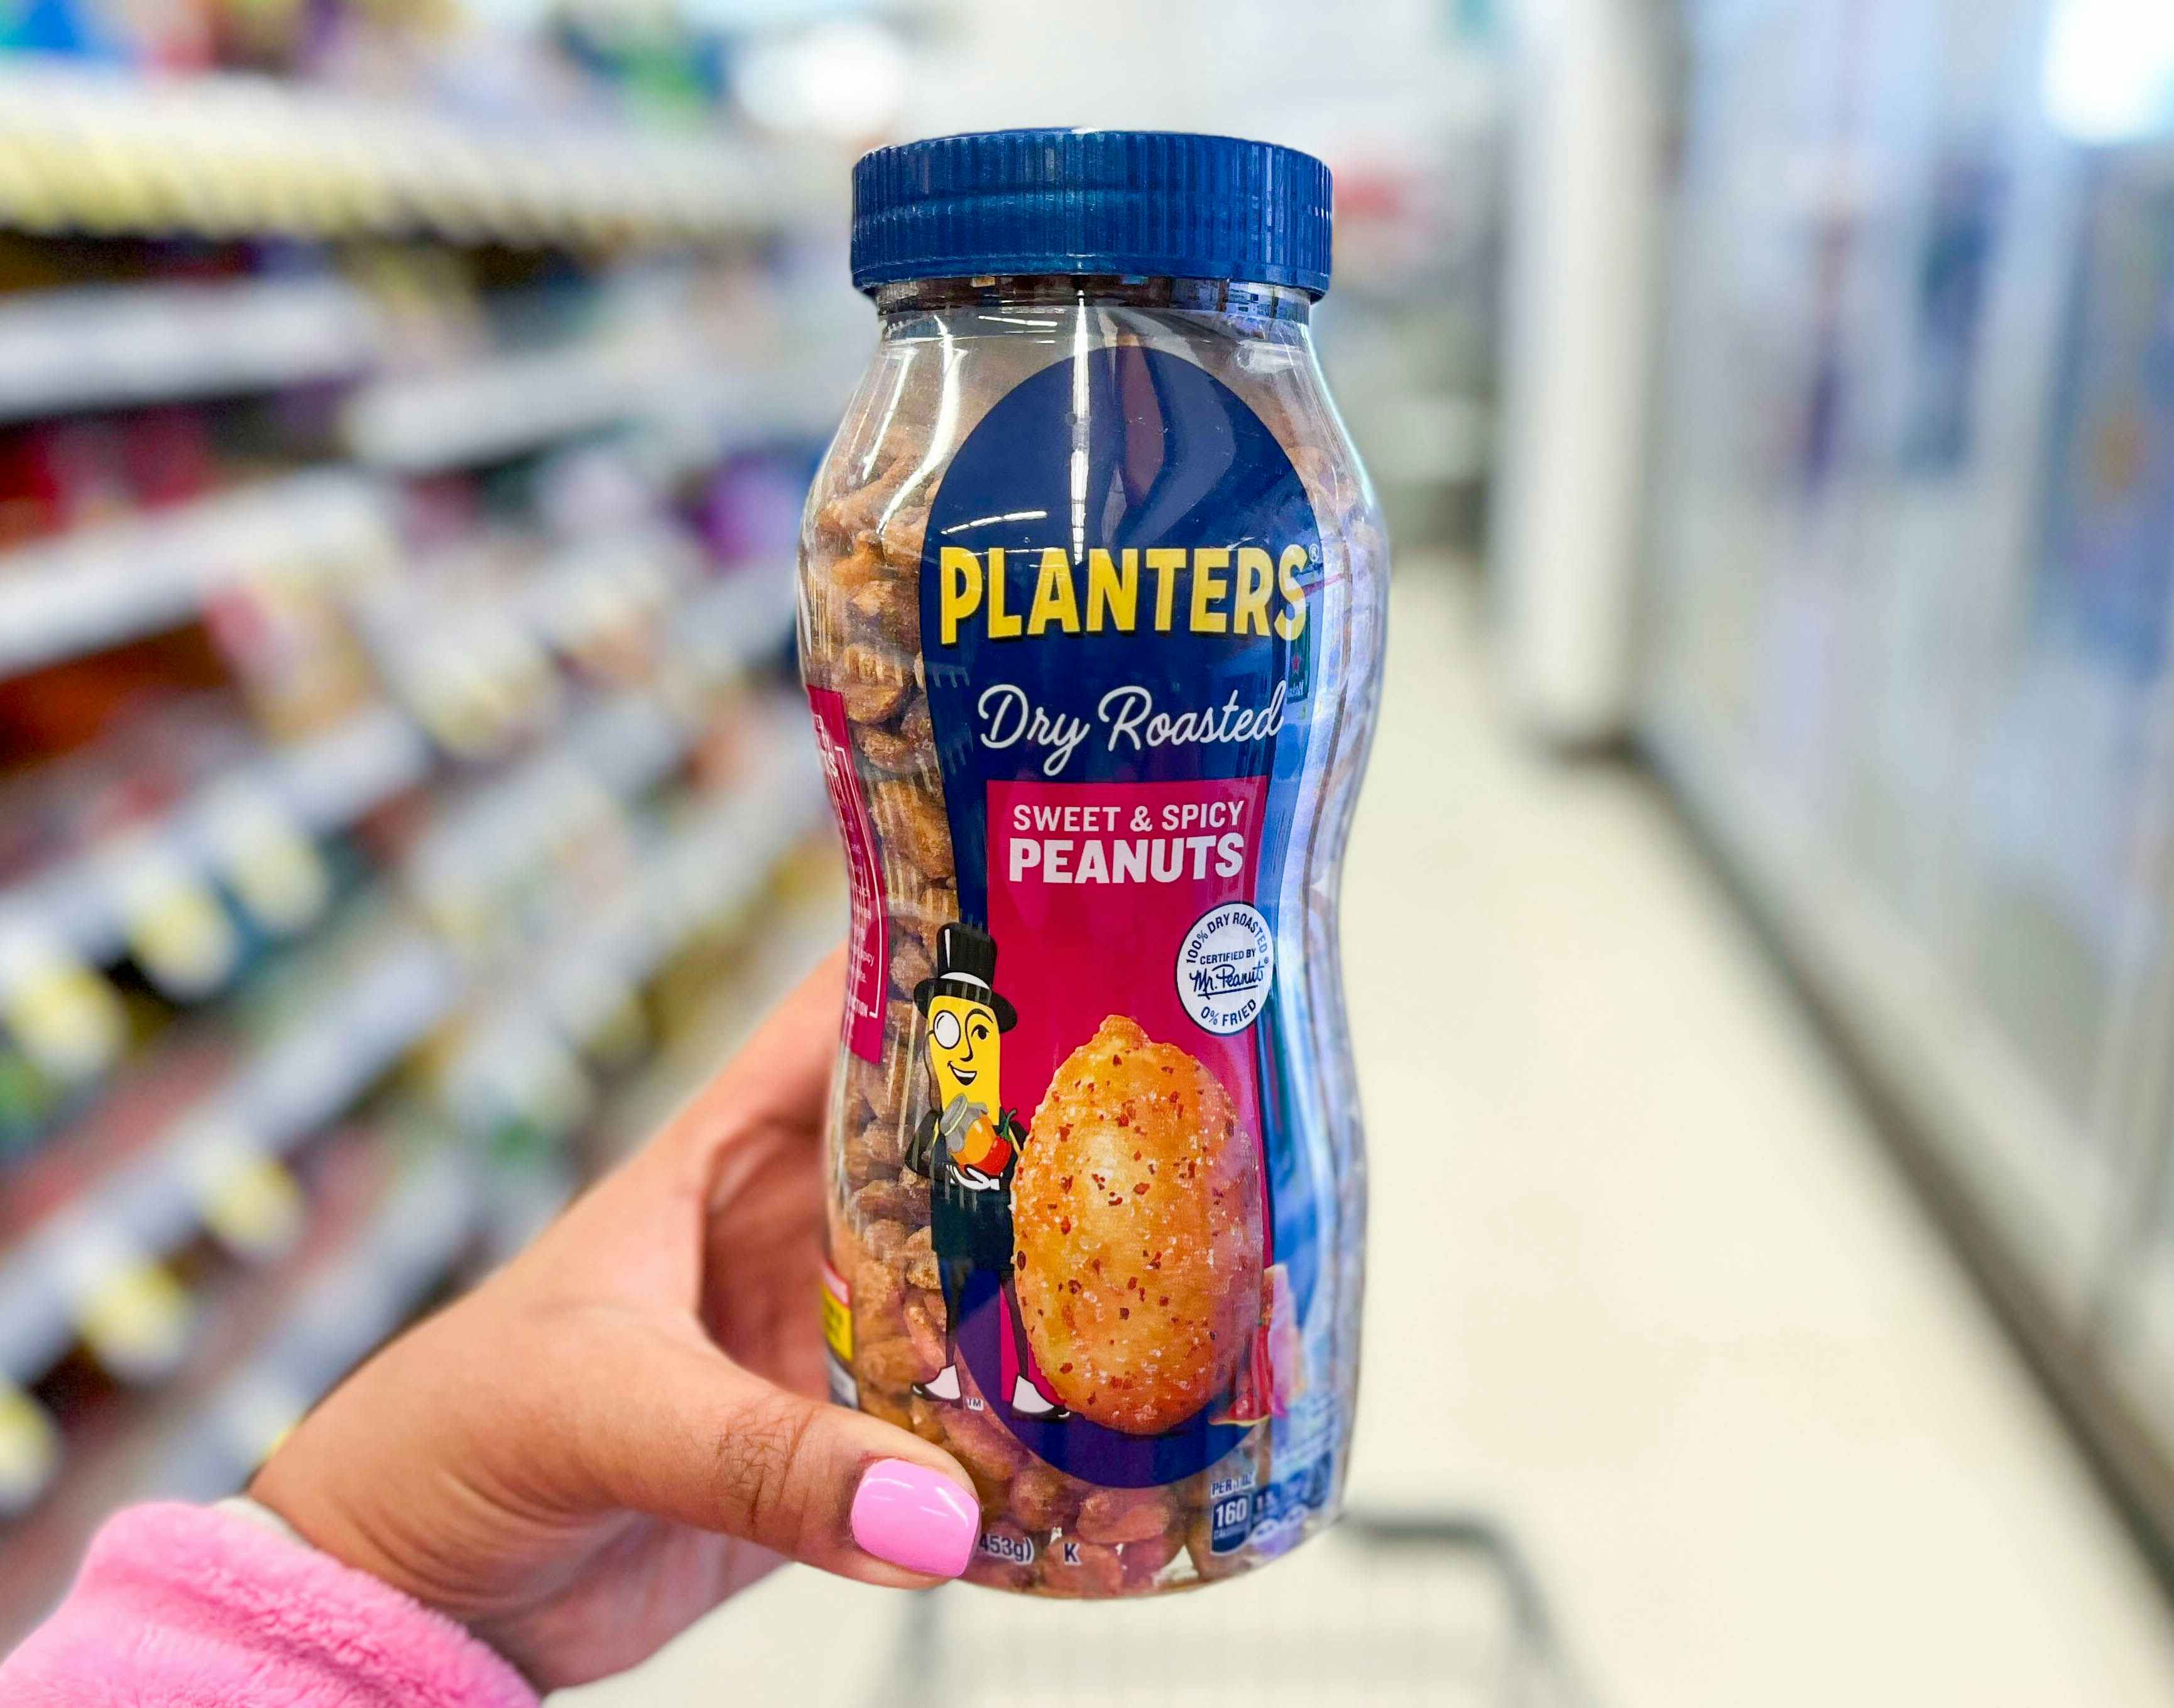 Planters Peanuts, as Low as $2.13 on Amazon